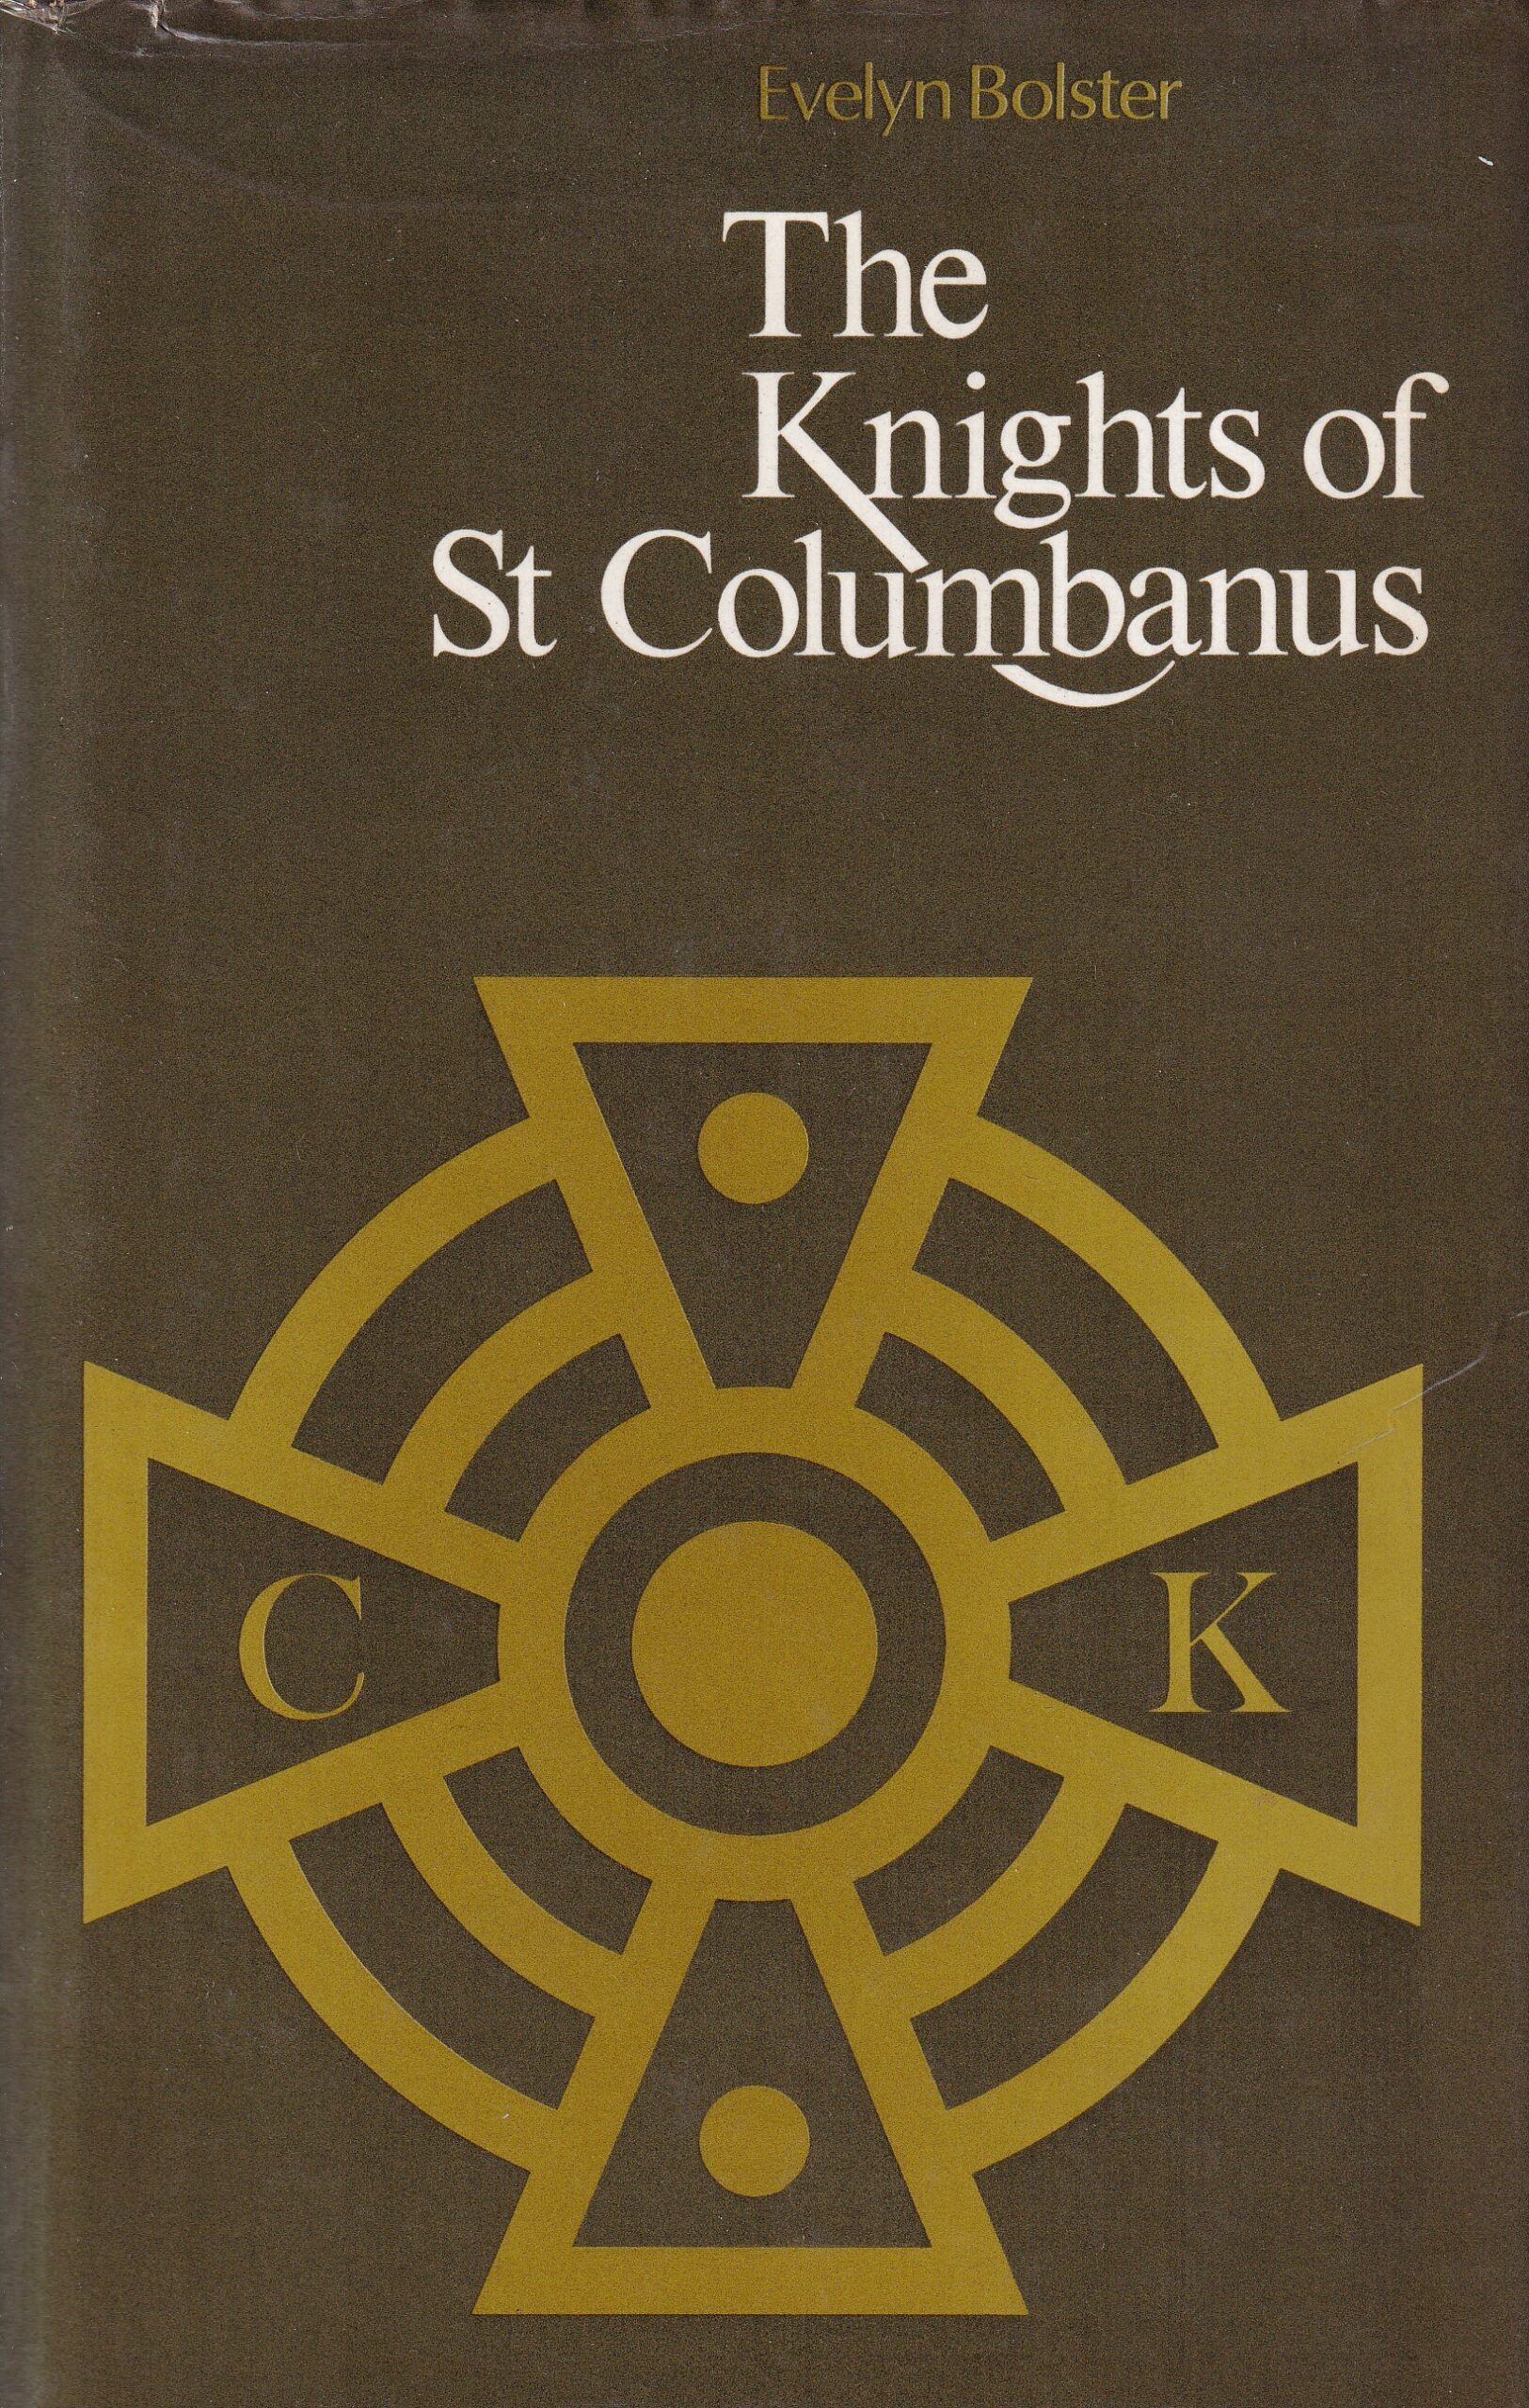 The Knights of St Columbanus by Evelyn Bolster